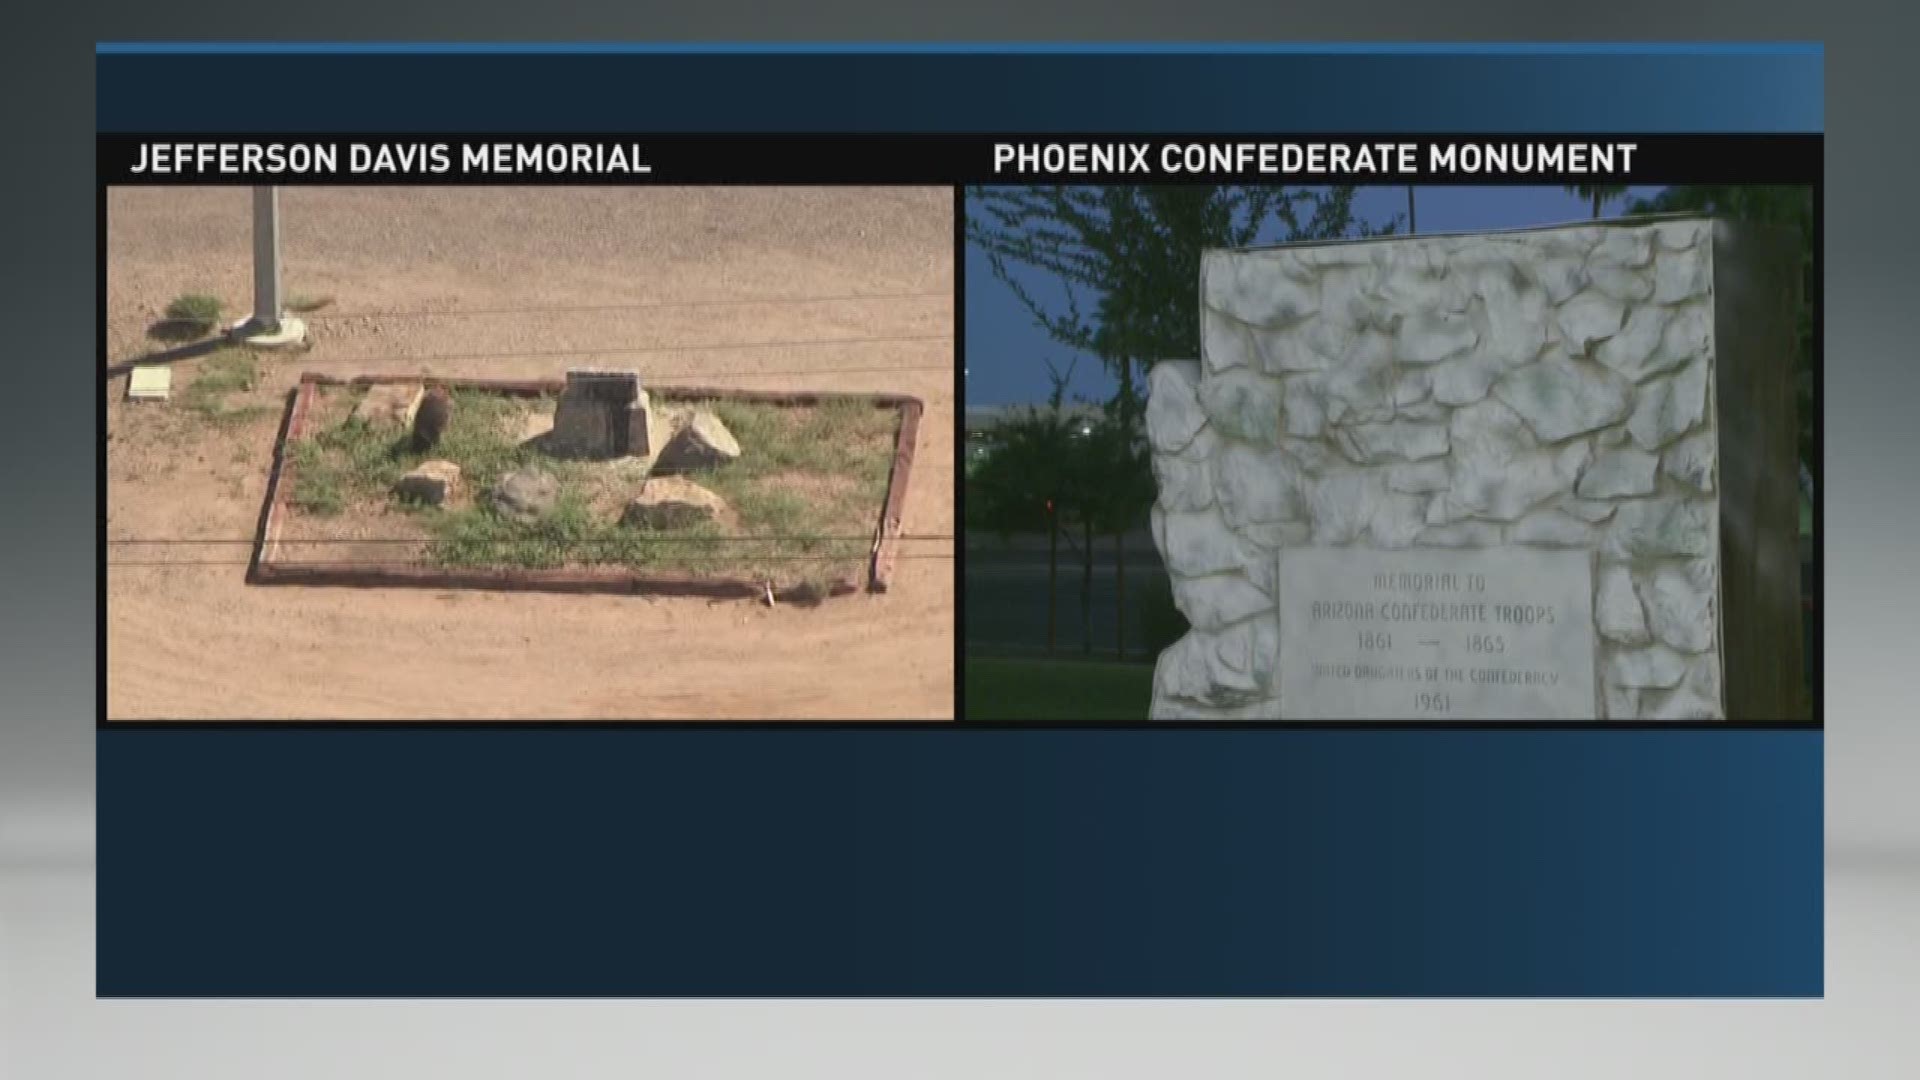 Tensions escalate as two Confederate monuments were vandalized in Arizona.